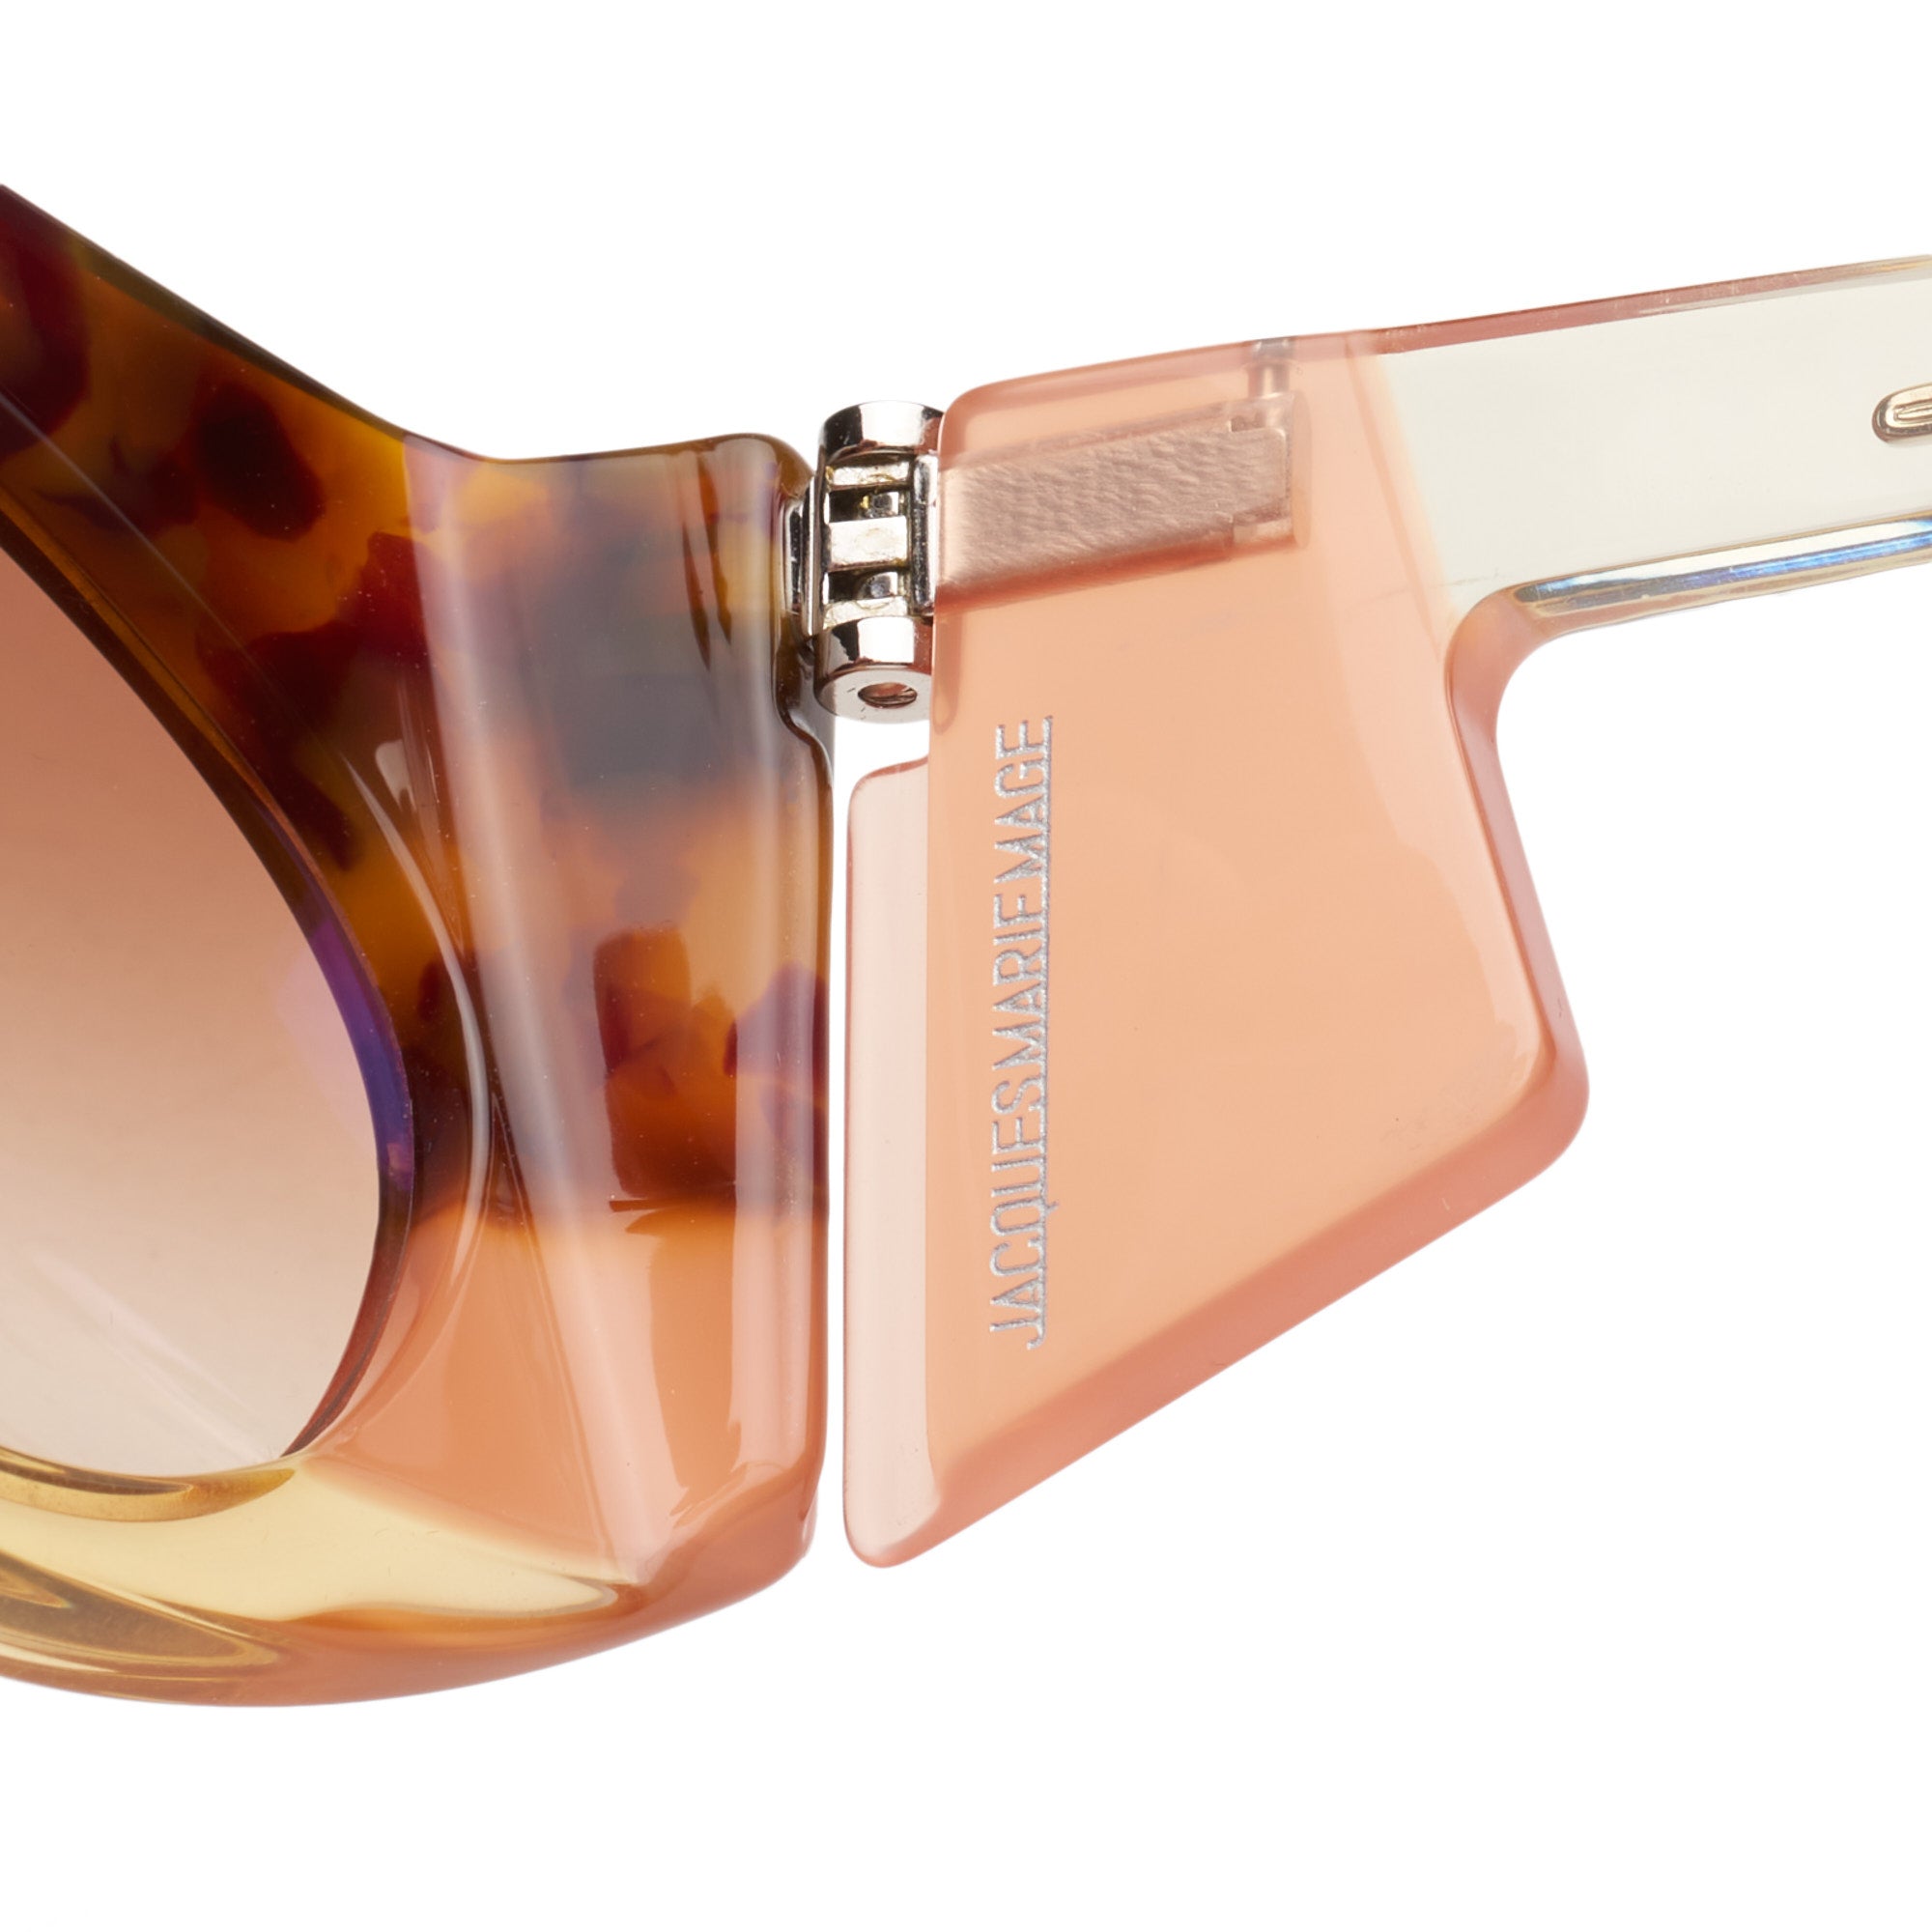 JACQUES MARIE MAGE "Duval" JMMDV-92 Limited Edition 11/150 Sunglasses NEW JACQUES MARIE MAGE